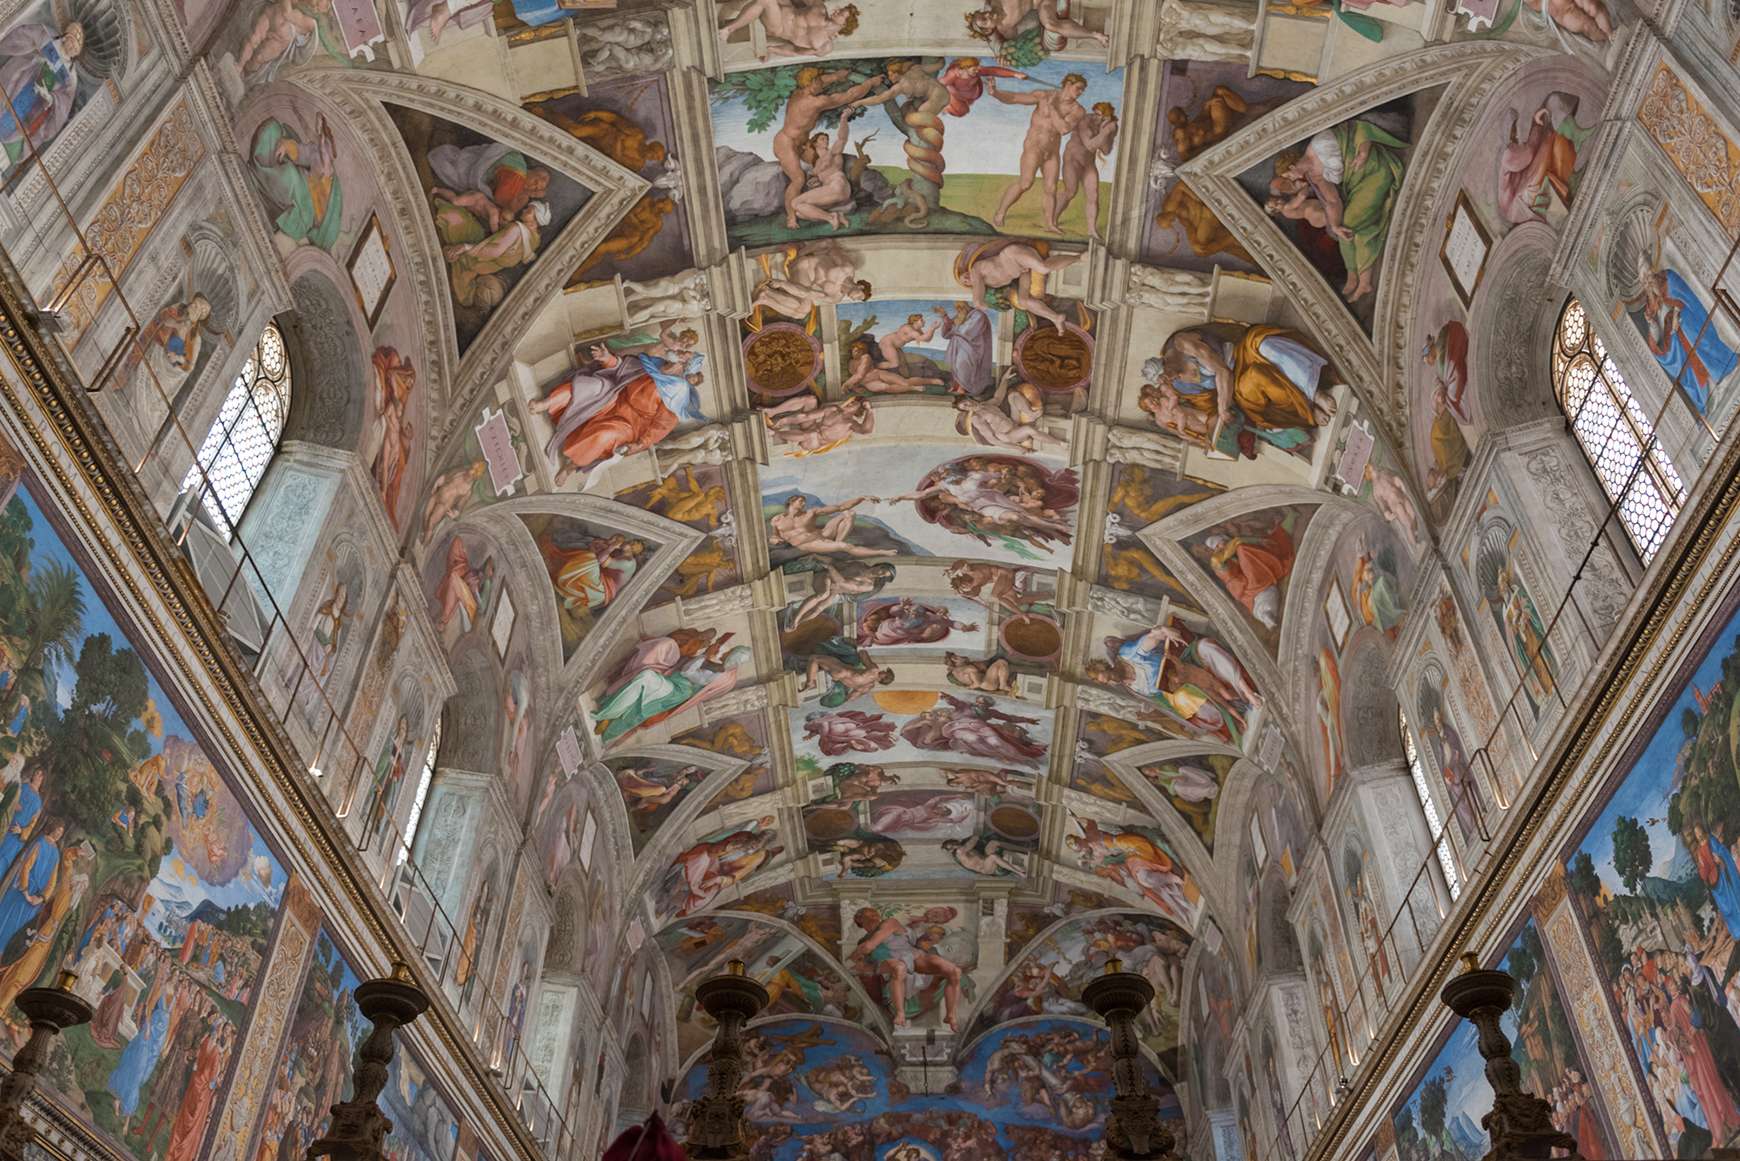 Looking up at the Sistine Chapel in Rome